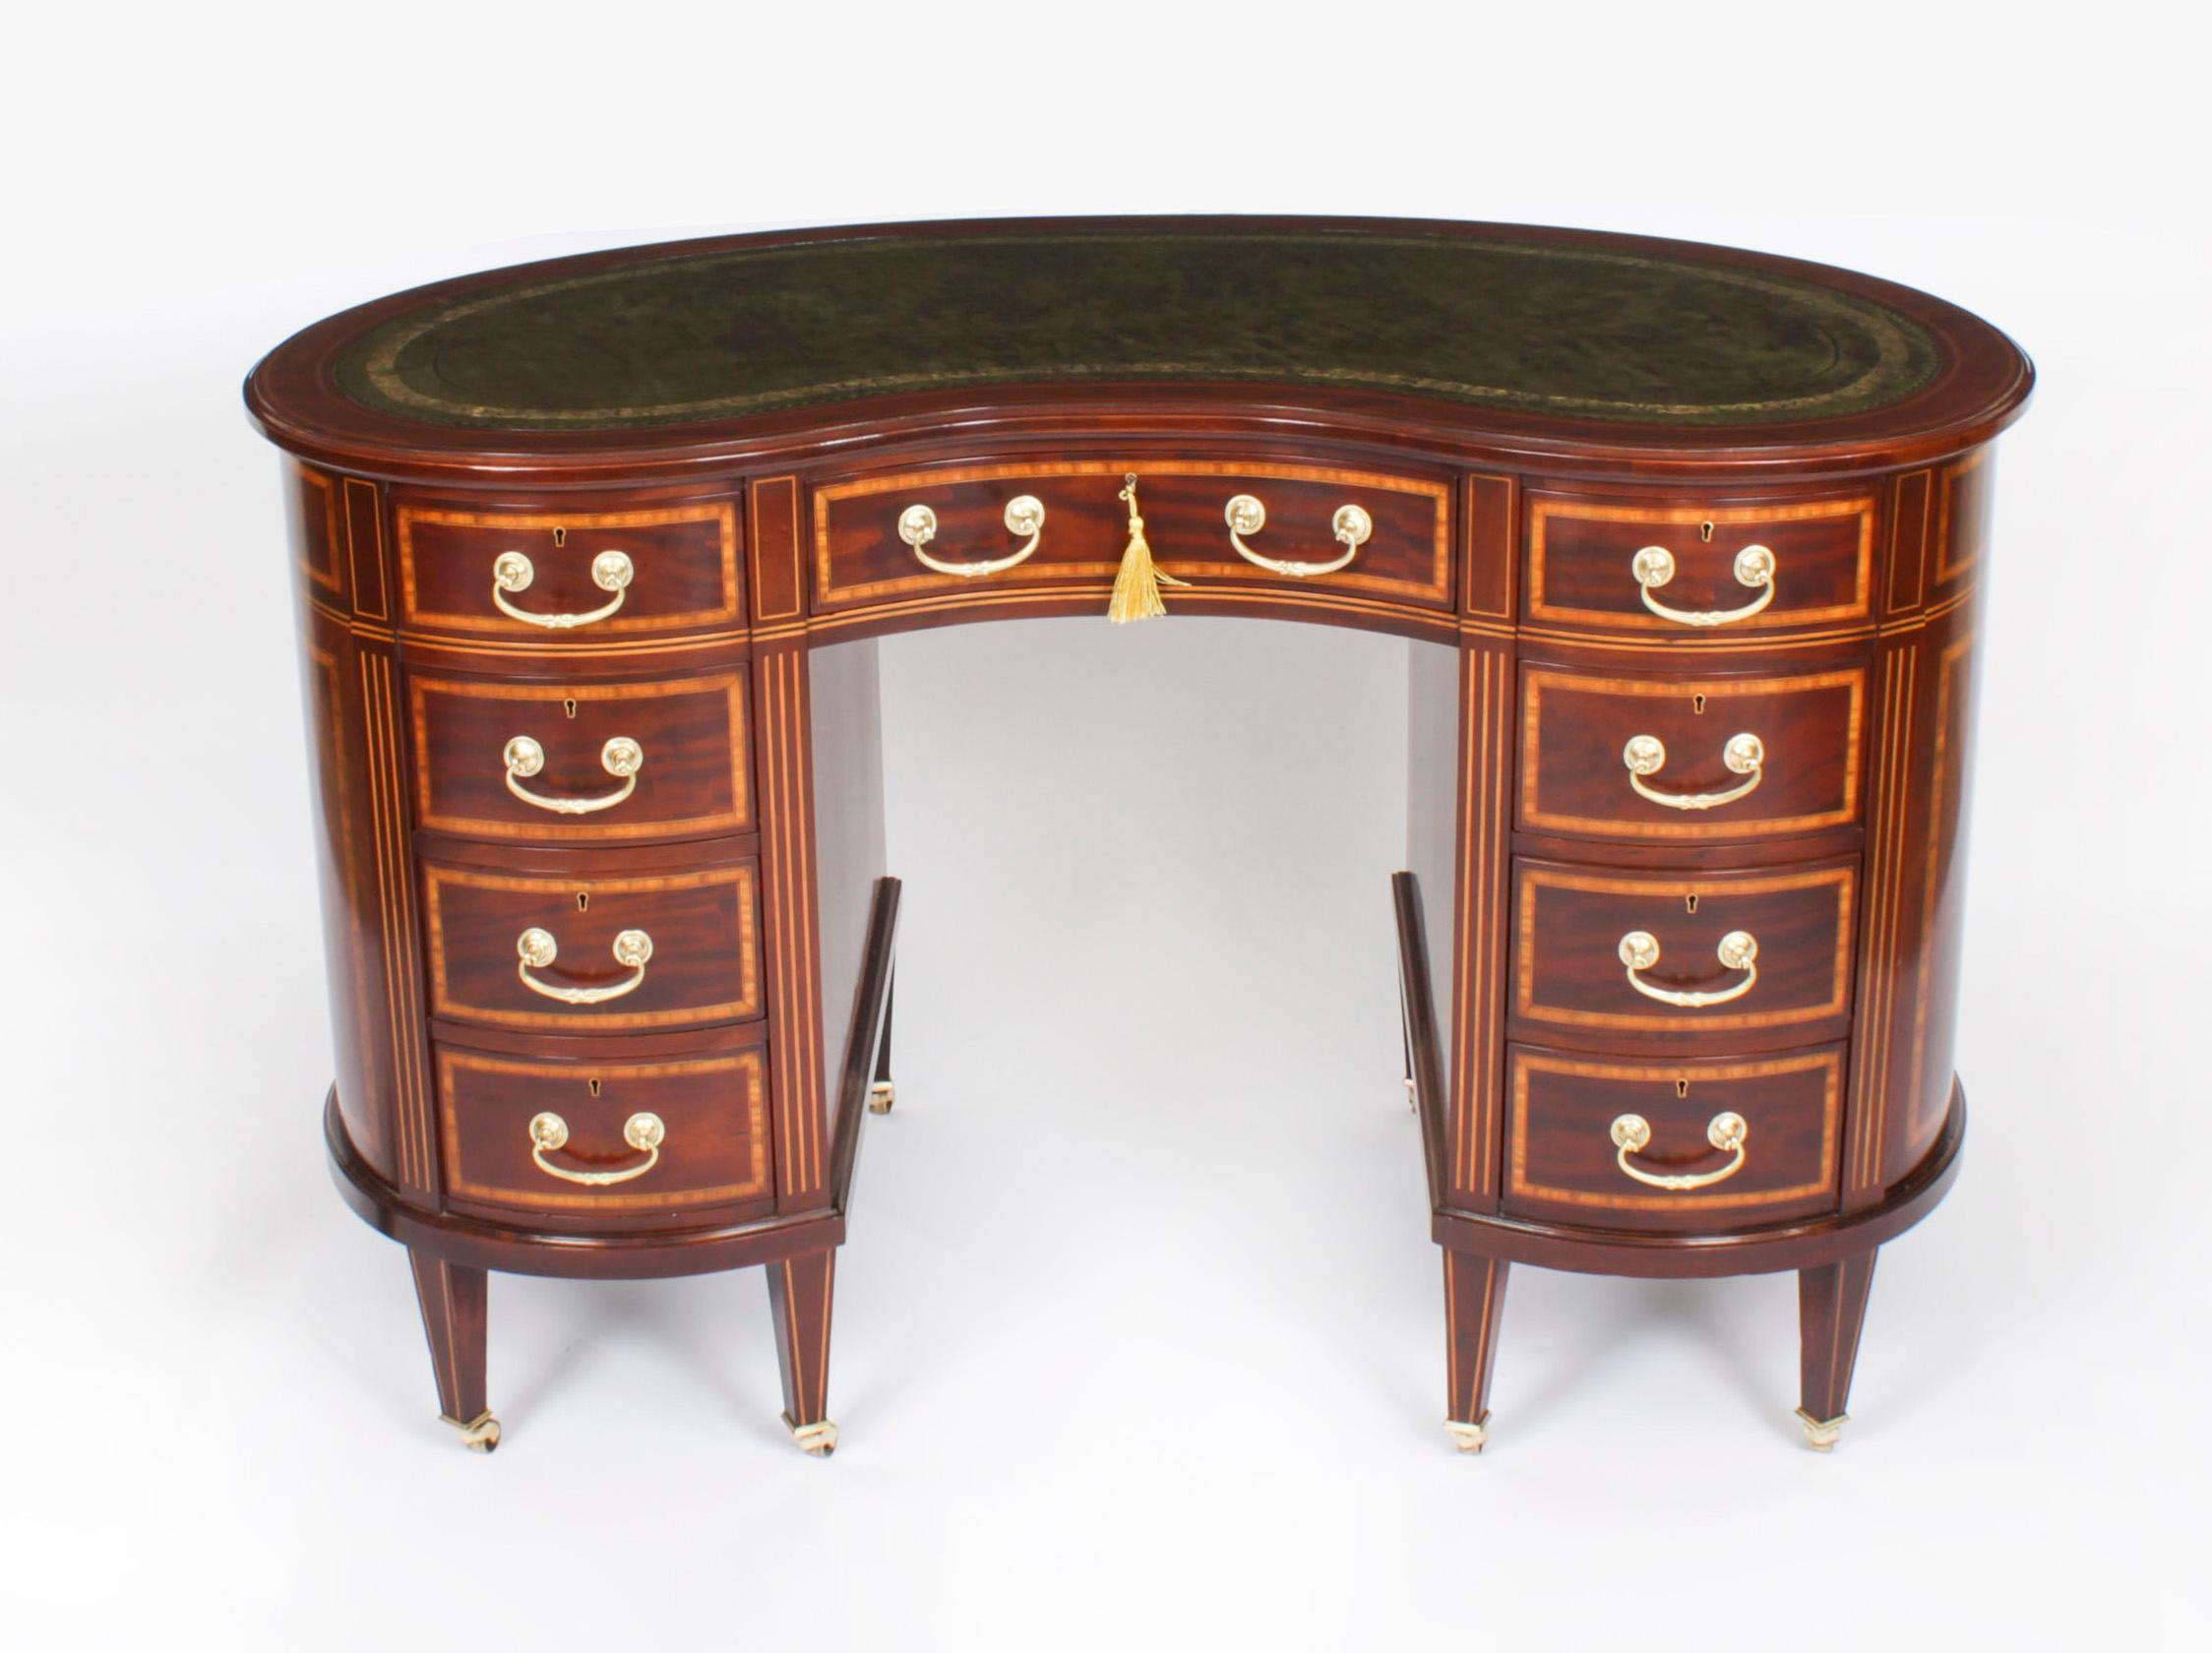 This is a delightful antique Victorian flame mahogany kidney shaped kneehole desk, Circa 1880 in date.

The free standing desk features satinwood and box woodline inlay and banding. The top is inset with a beautiful gold tooled dark green leather